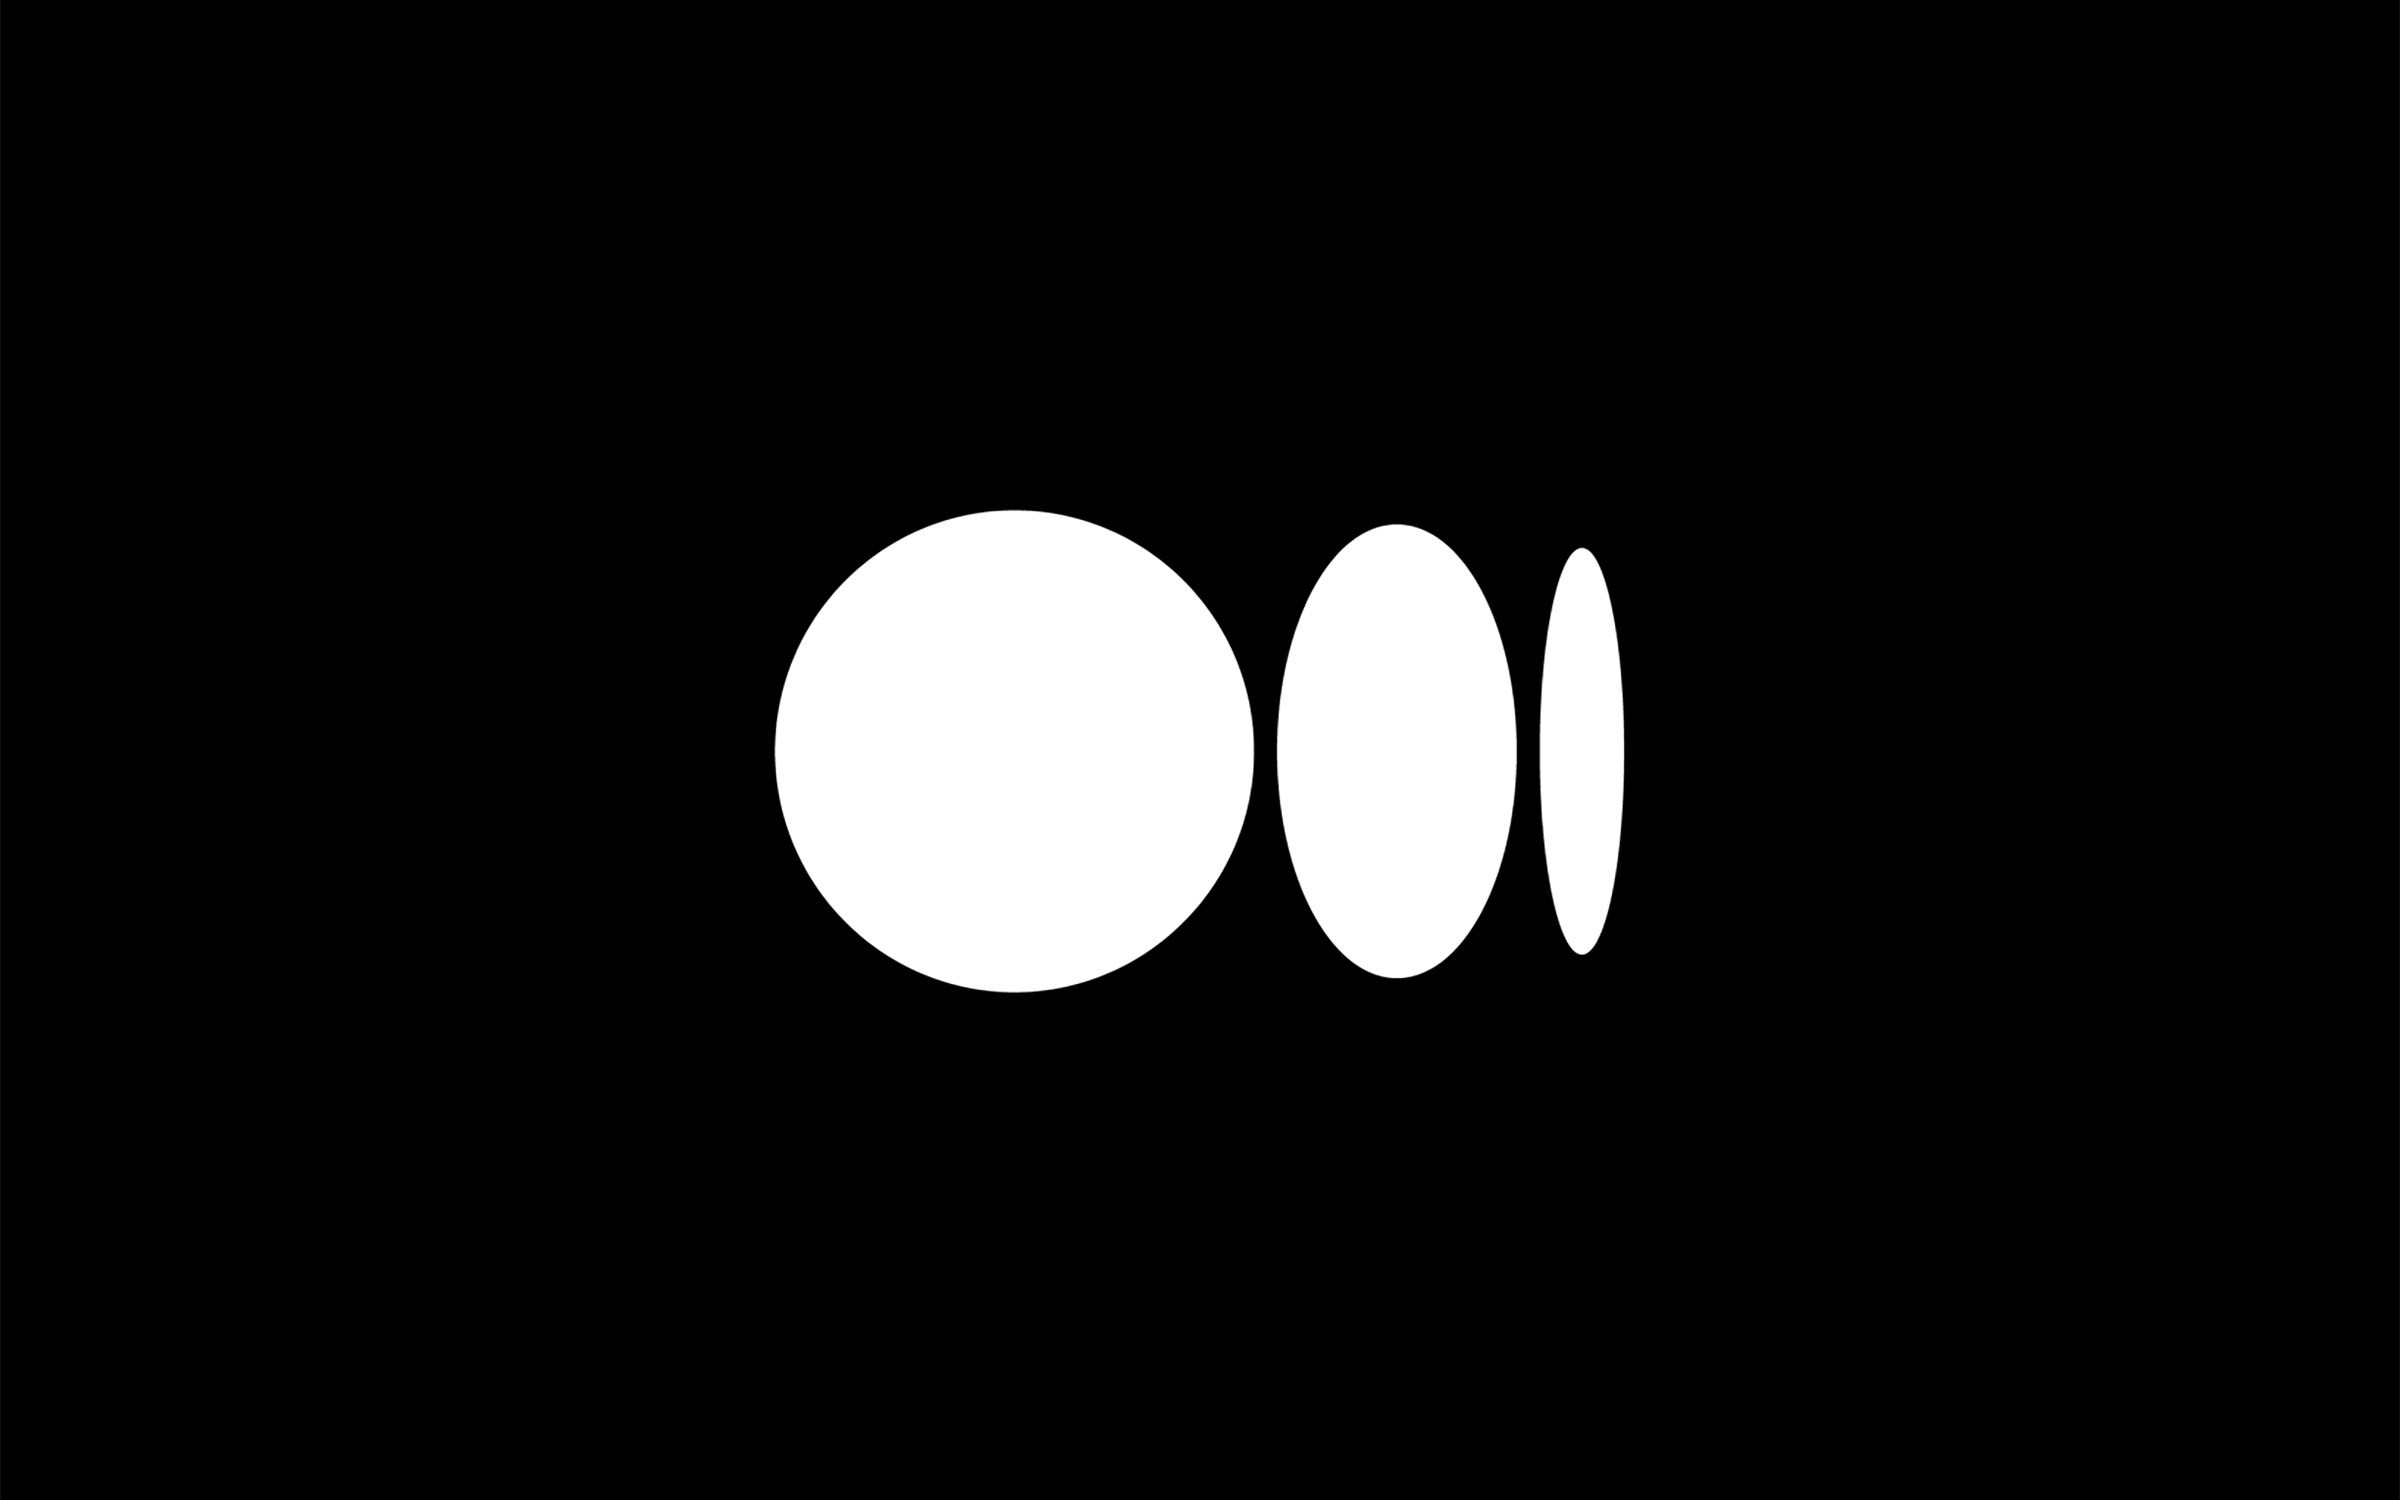 An introduction to Medium’s new evolved brand identity